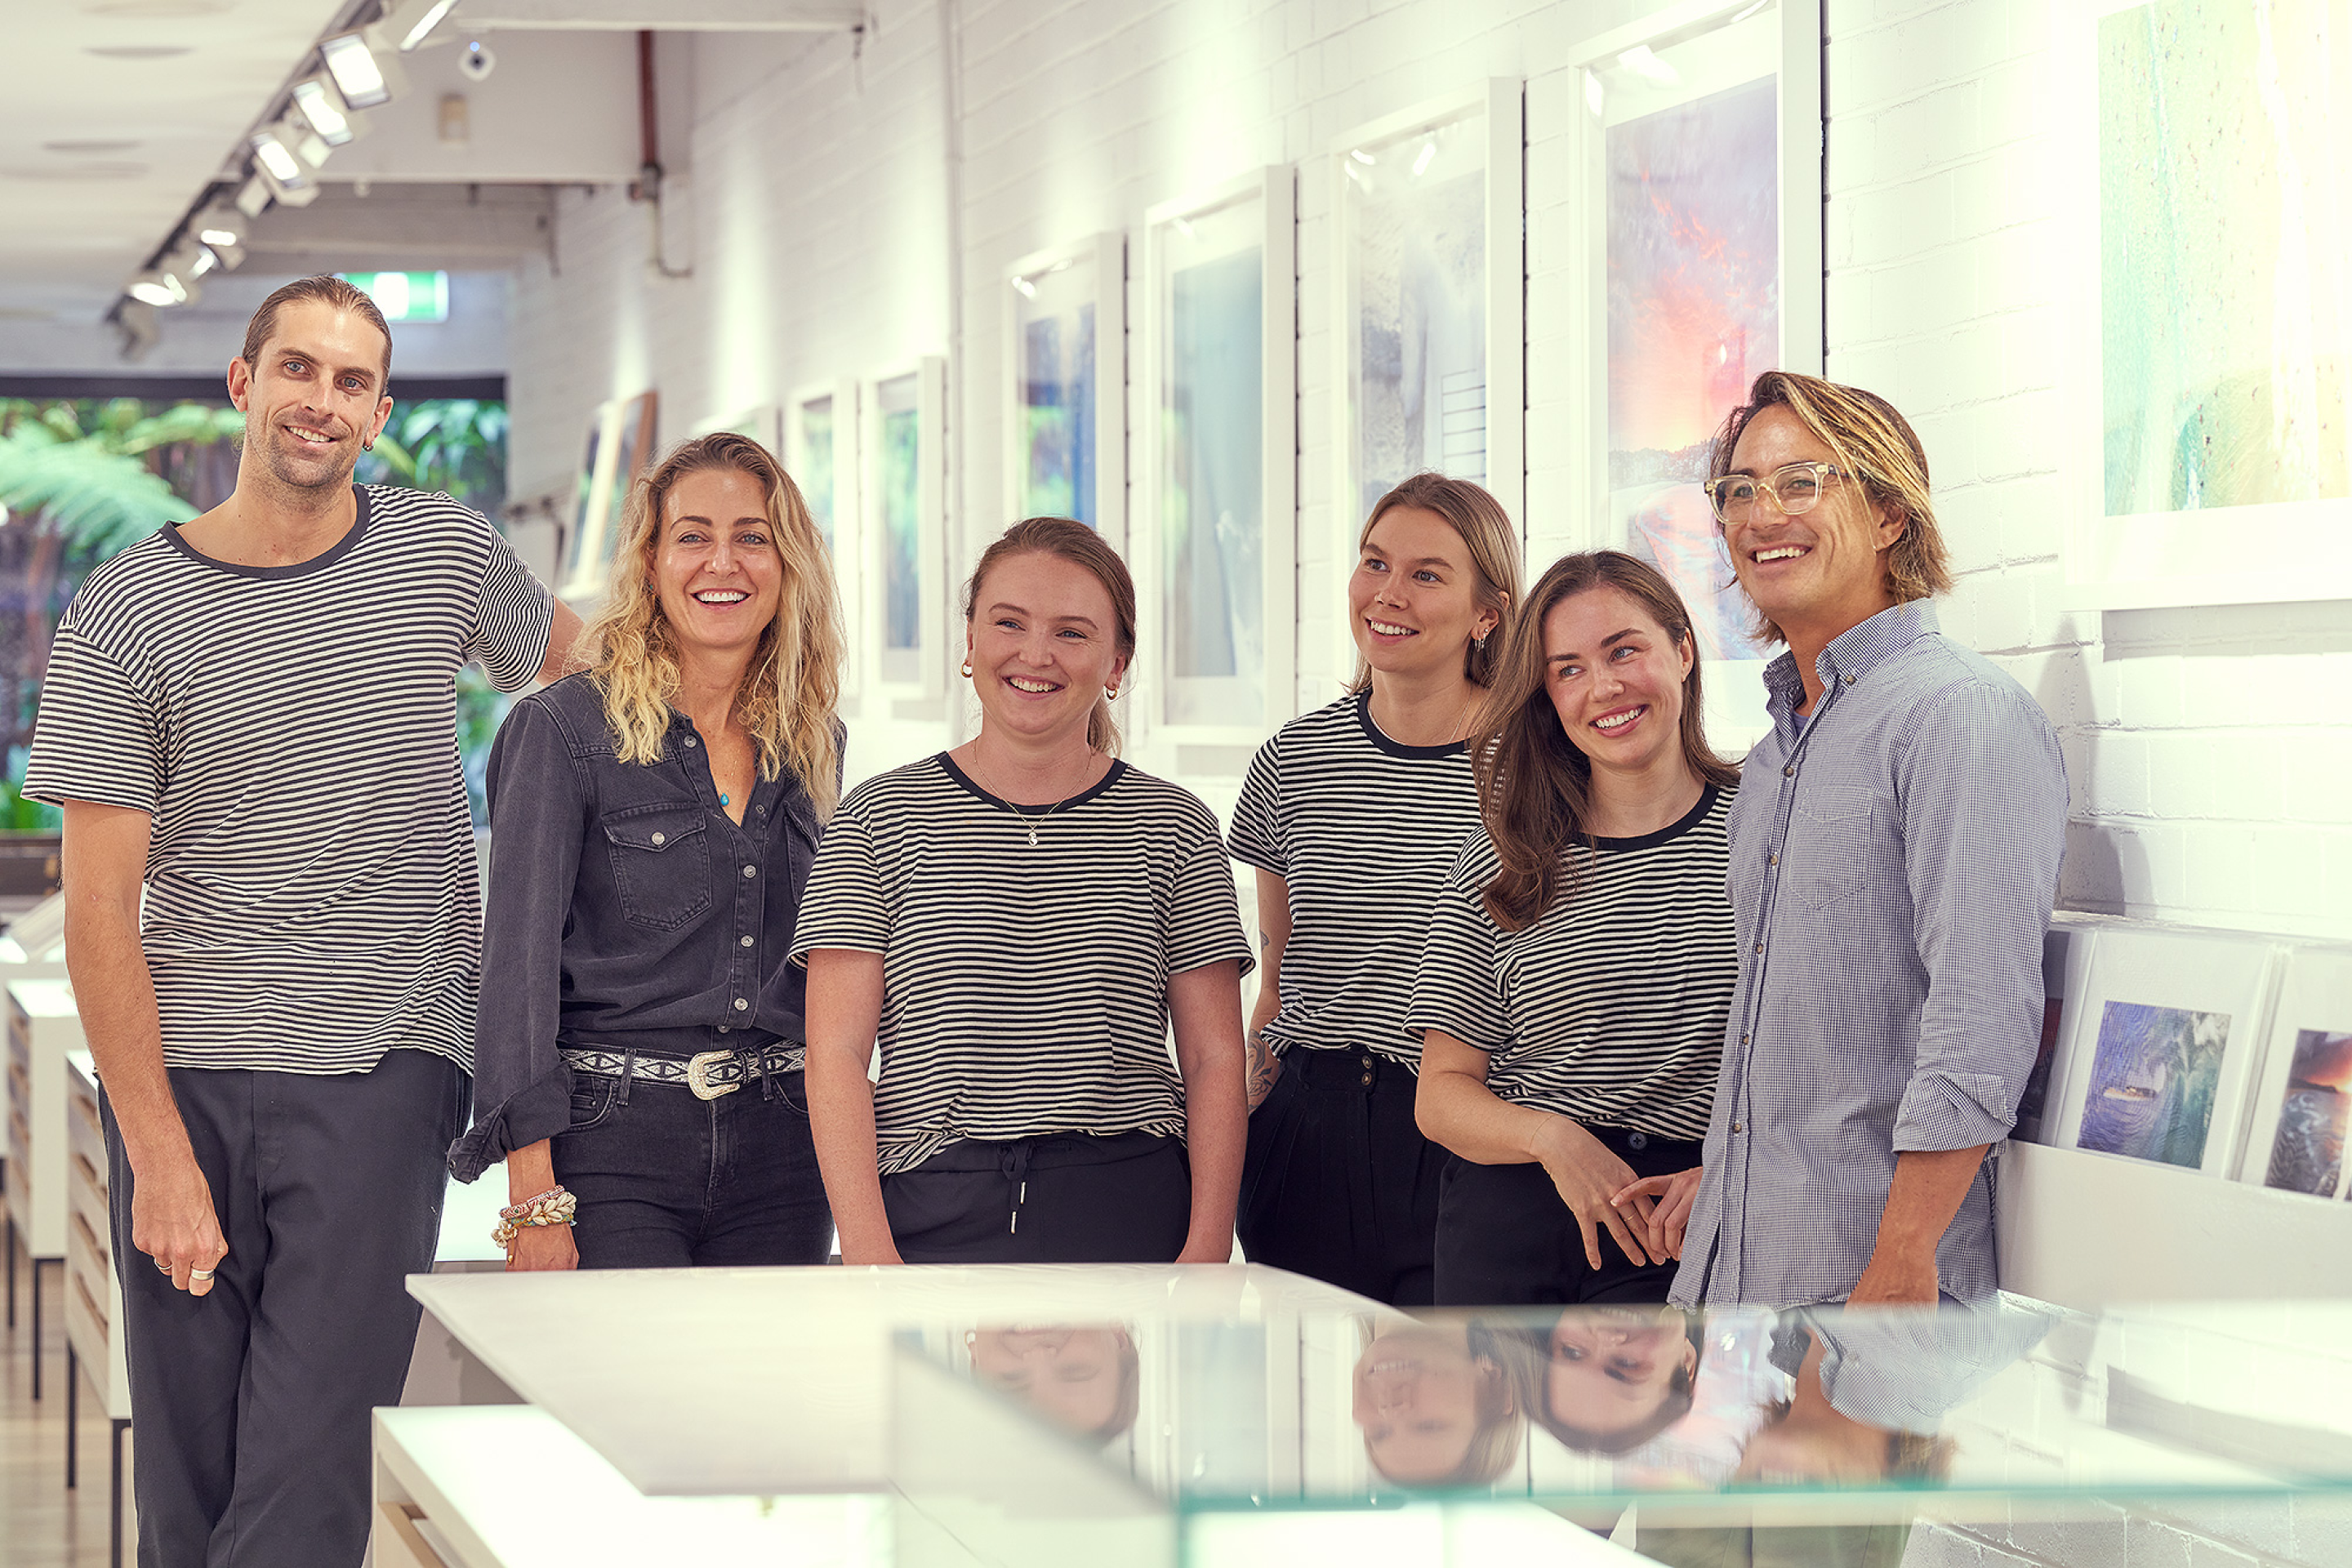 Six people on the Aquabumps team in the art gallery